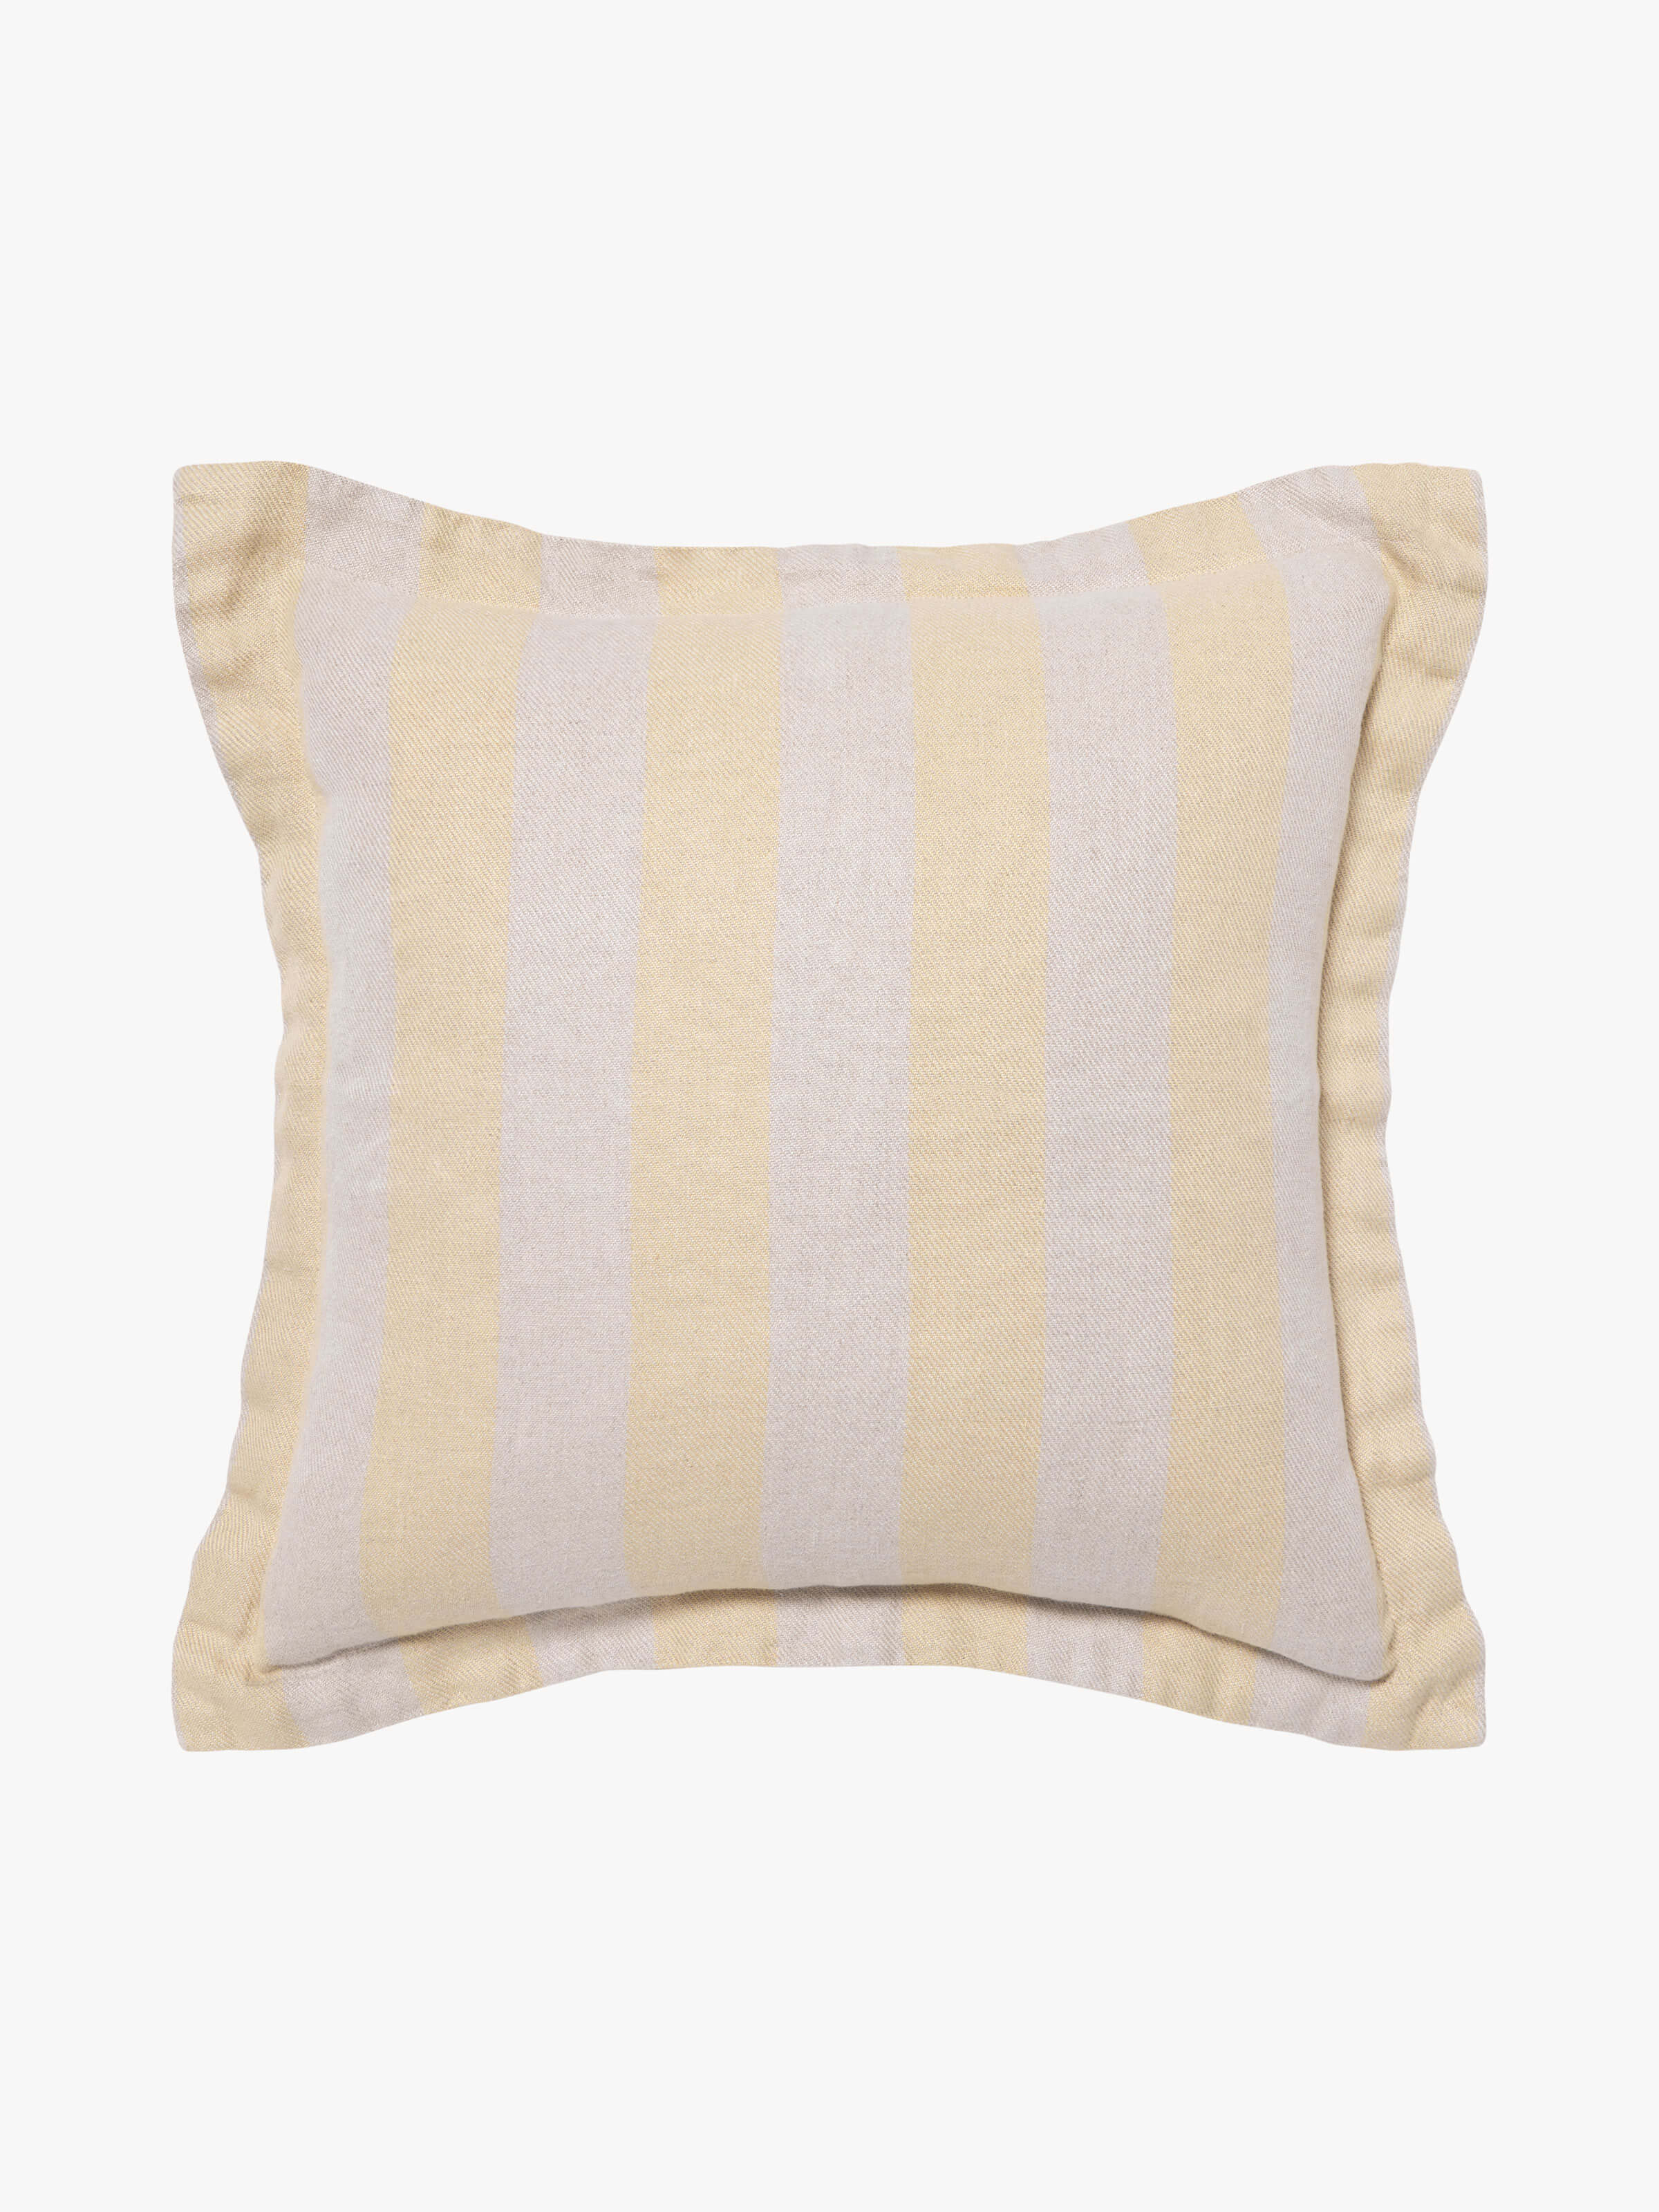 Voyage Limone French Linen Cushion